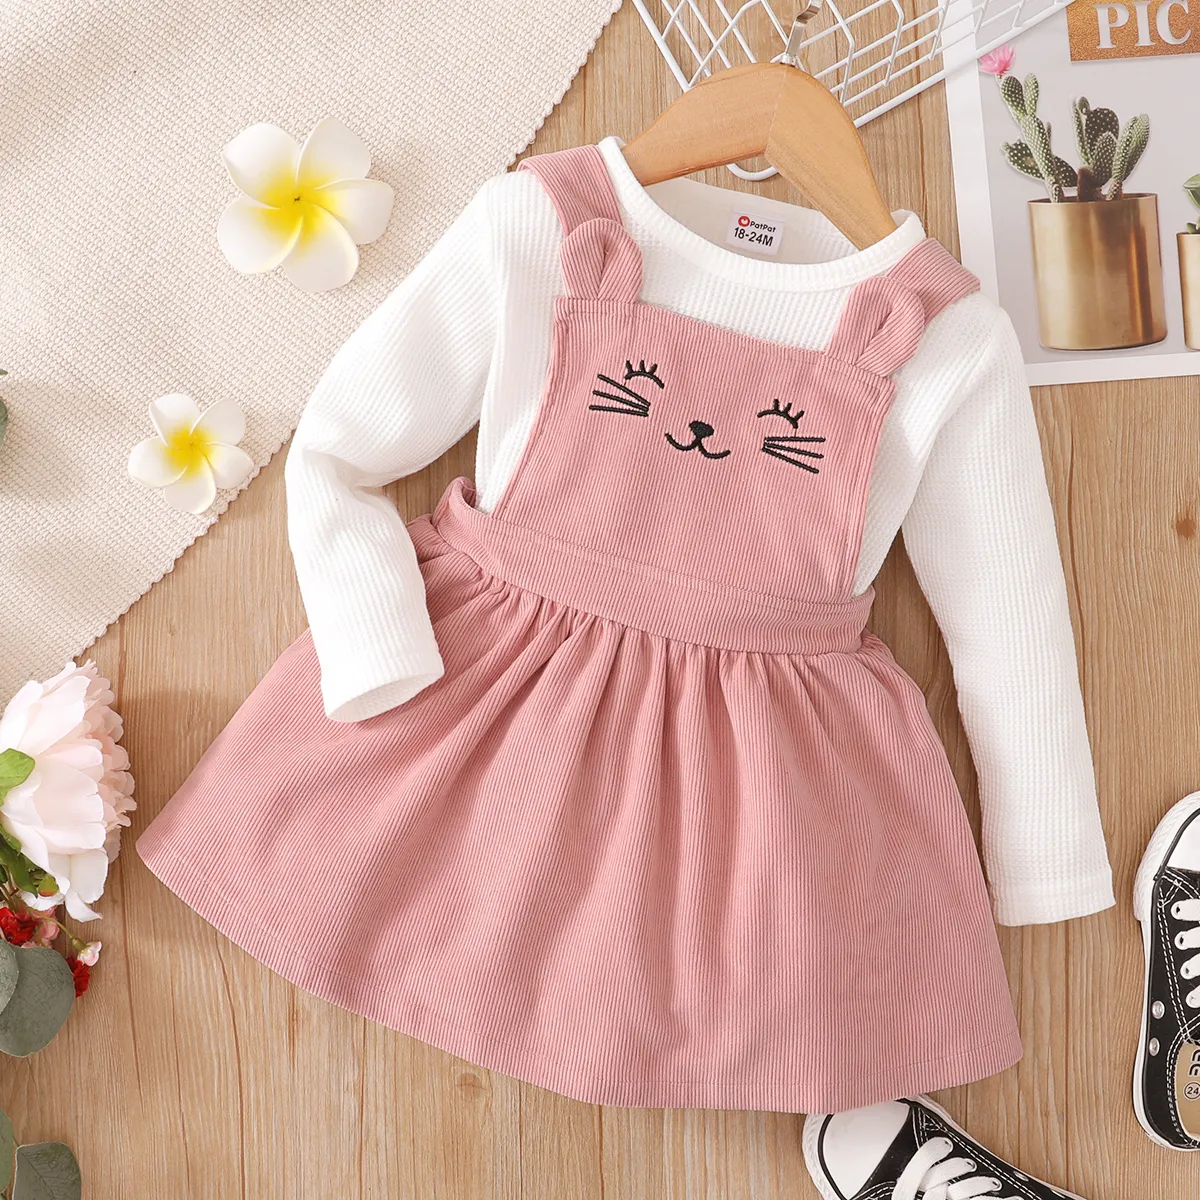 2-piece Toddler Girl Waffle White Top and Cat Embroidered Pink Overall Dress Set Pink big image 1